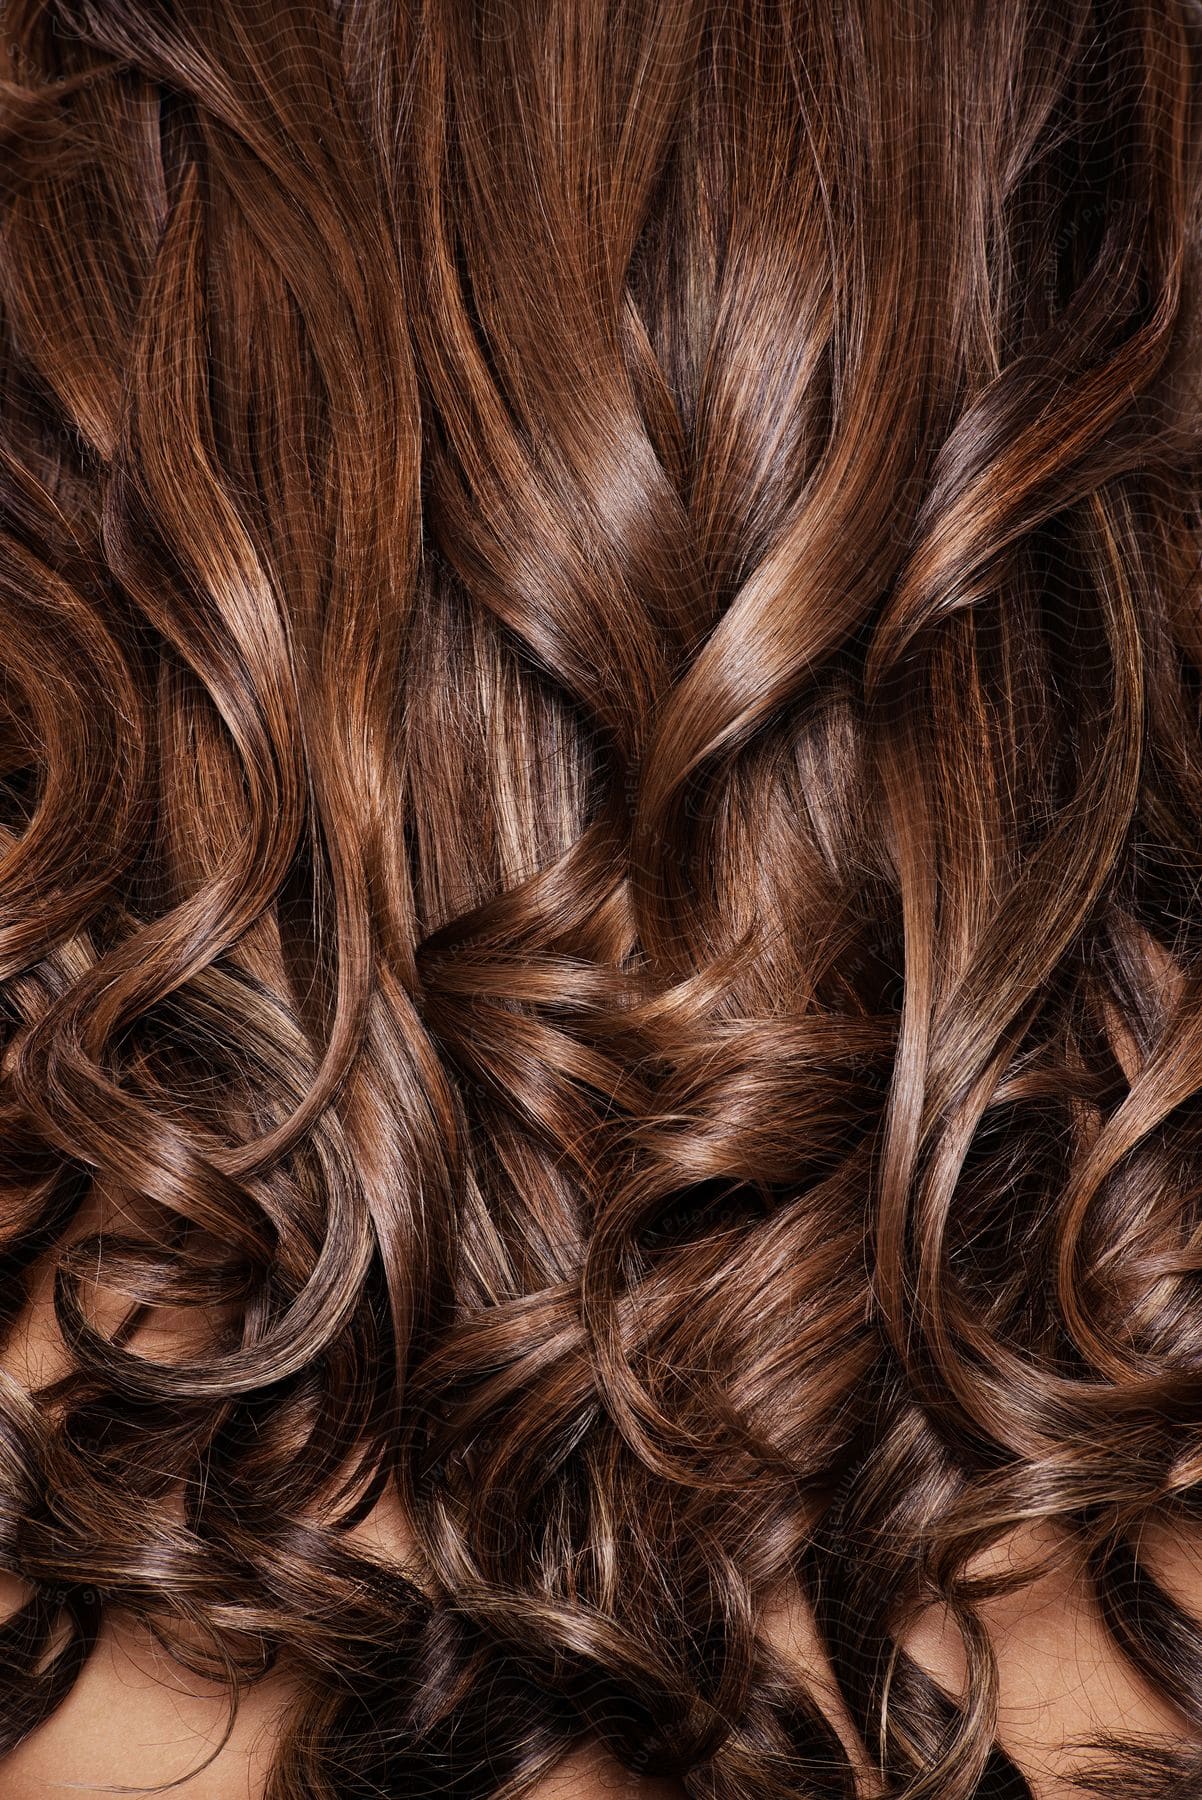 Long hydrated and luminous brown hair with curls.